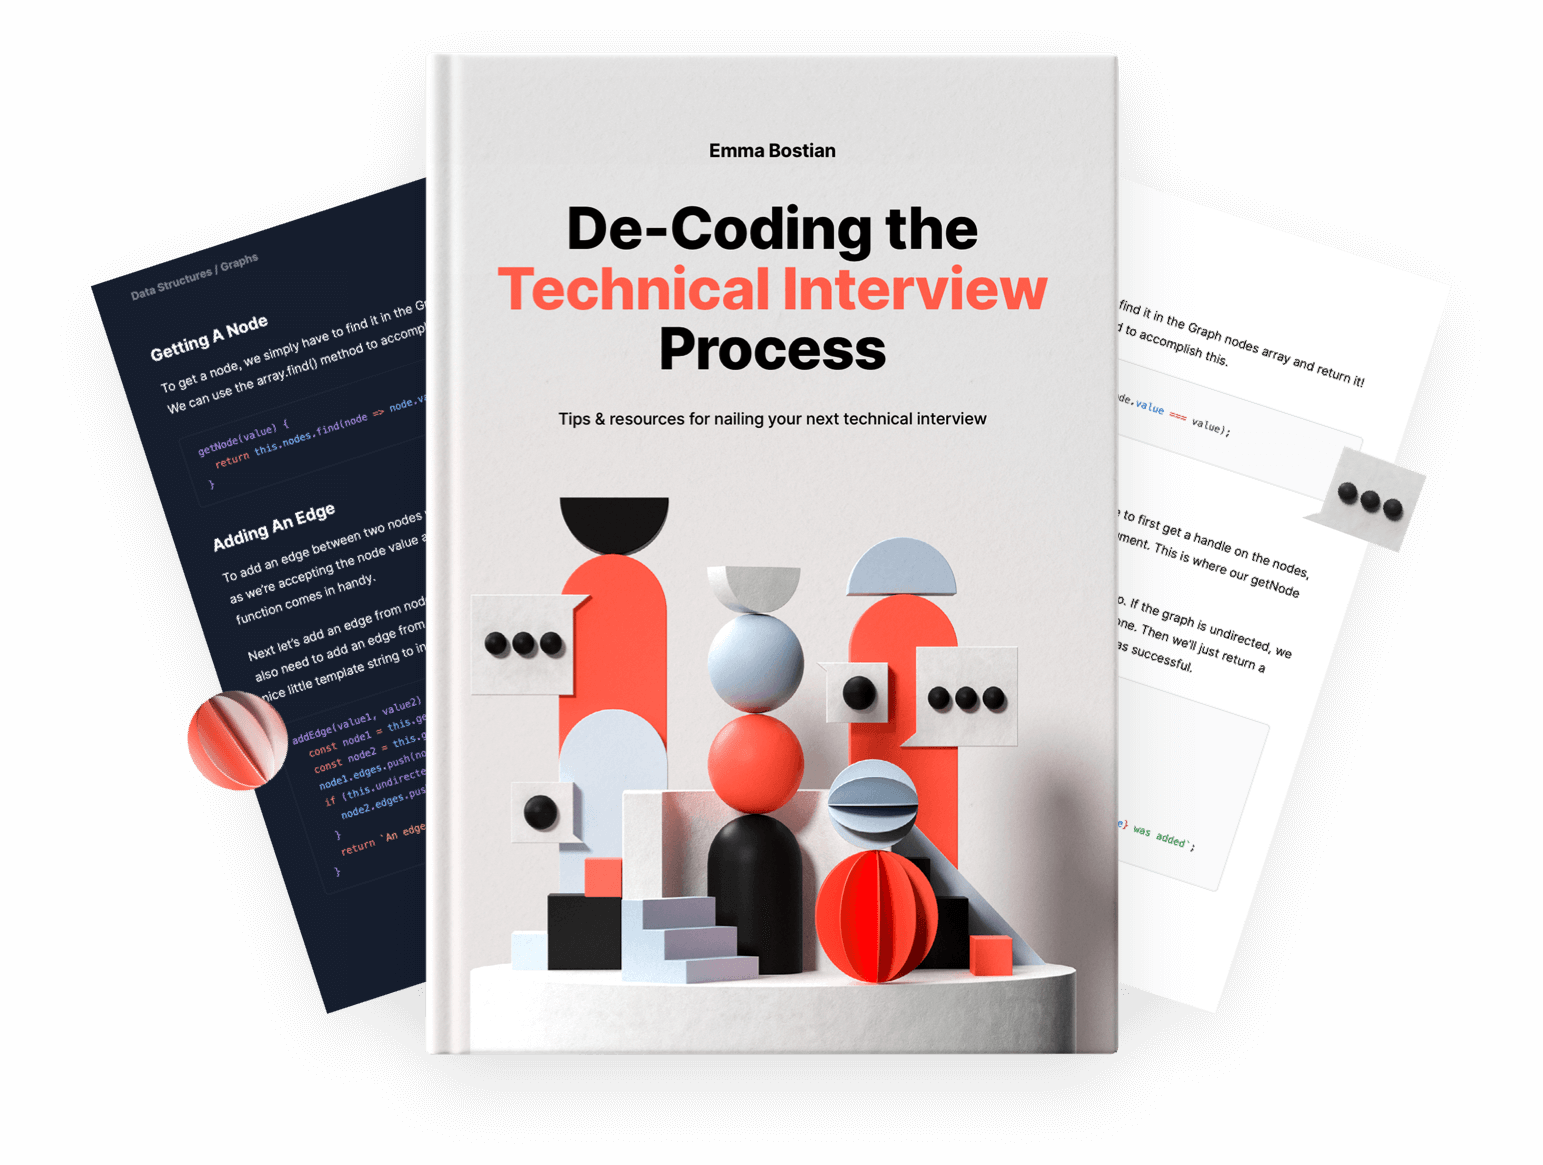 De-Coding the Technical Interview Process - book by Emma Bostian